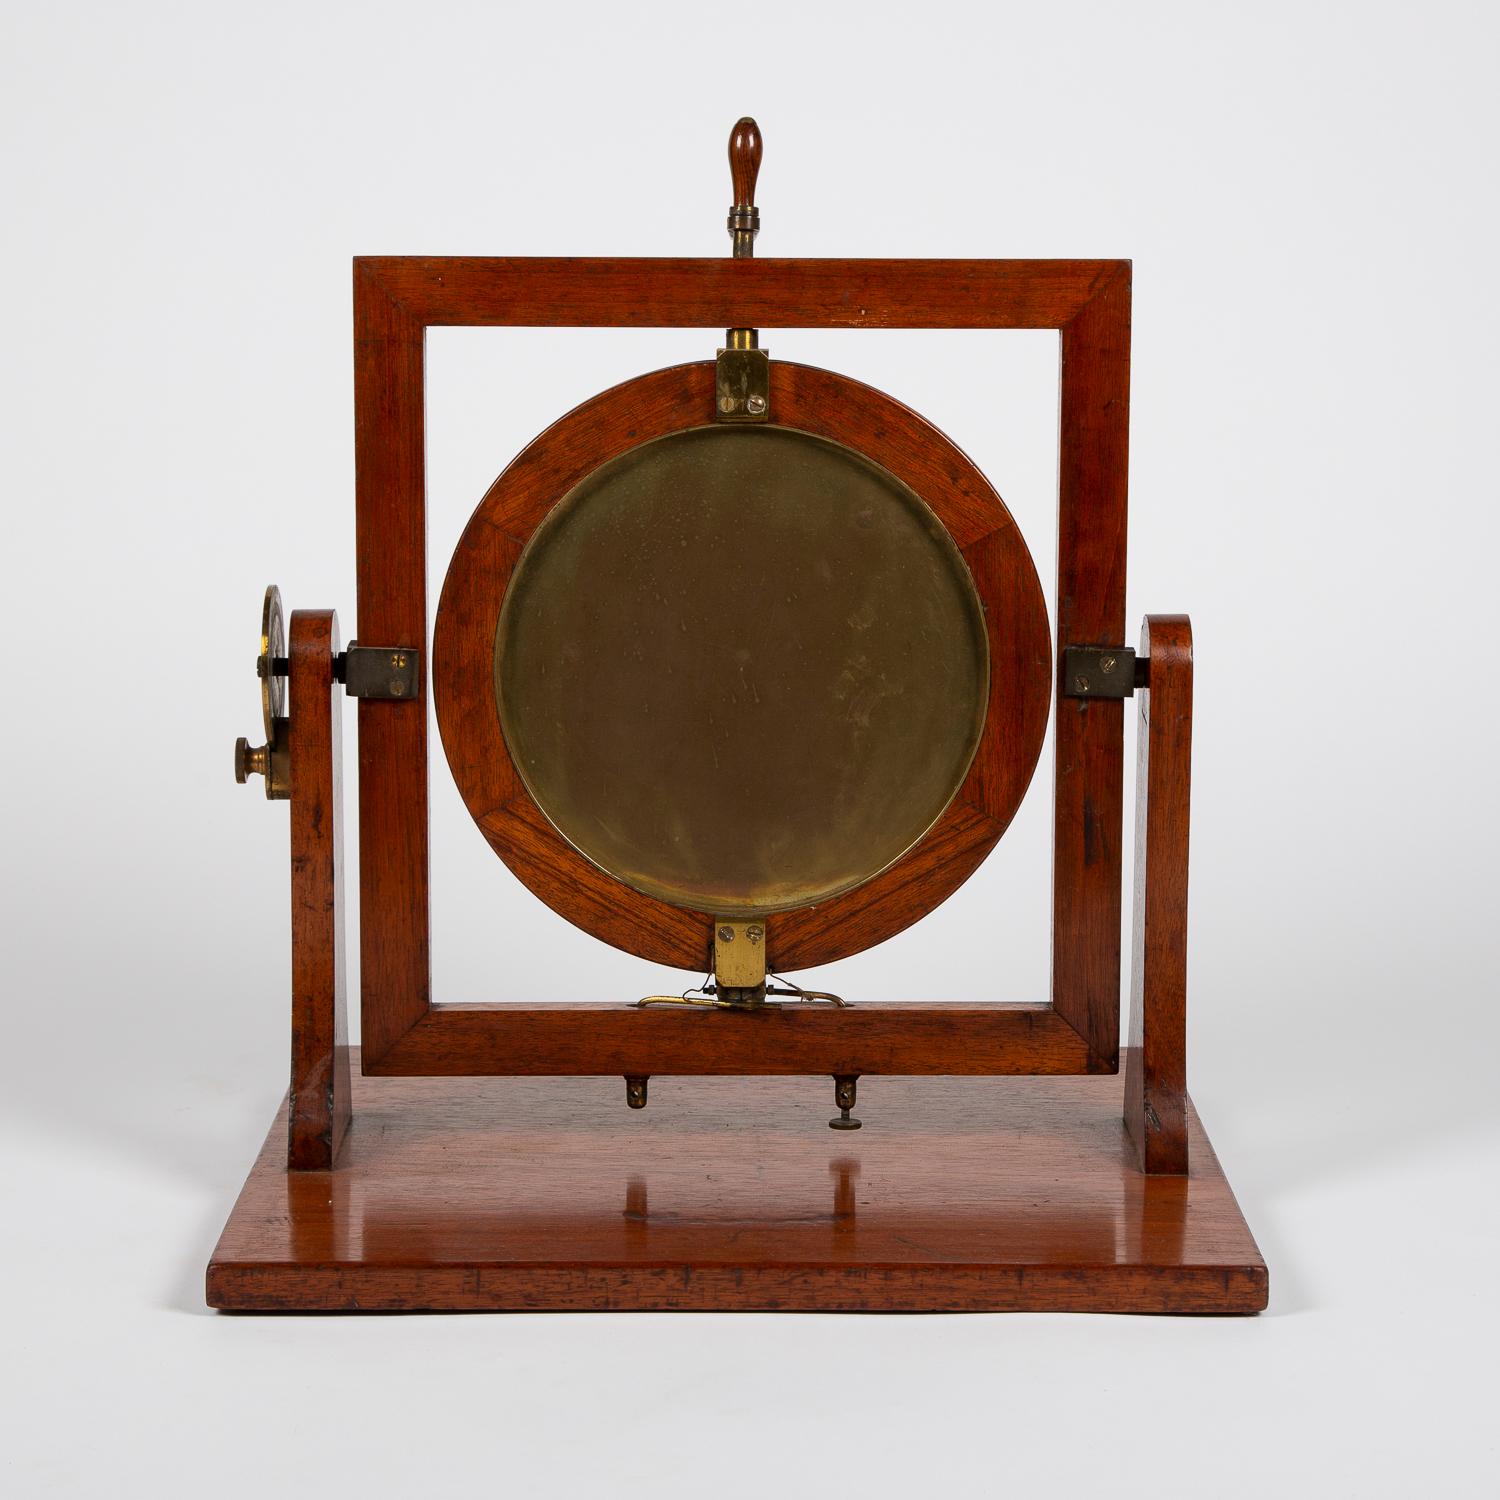 An Earth Inductor (Delzenne's Circle) by Elliott Brothers of London, circa 1910.

The rotating circle is mounted with a brass backed mirror.

The right hand side of the frame has a gilt brass circle divided by an 180 degree scale, subdivided by